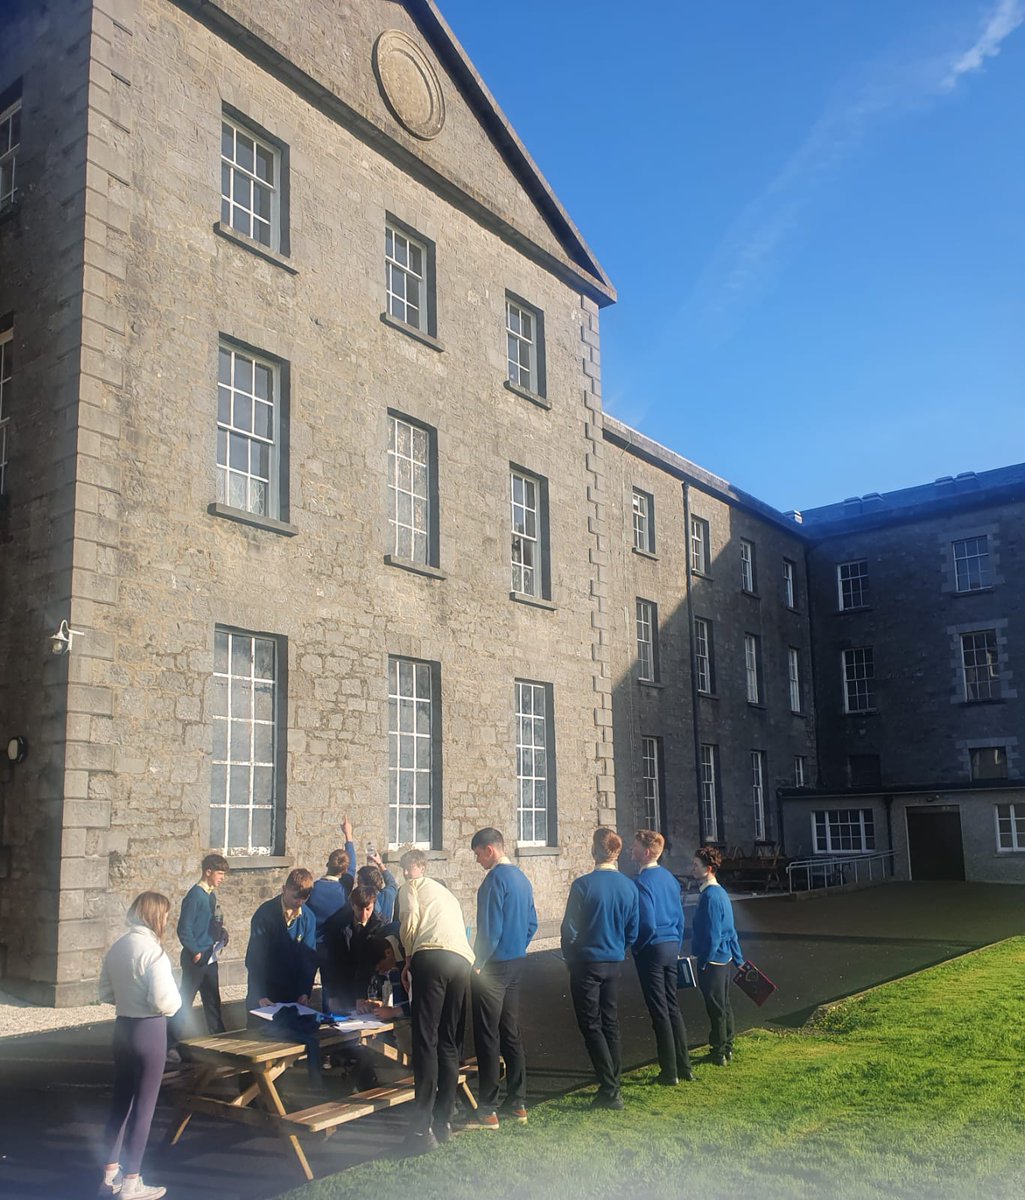 TY students took part in an interactive Maths lecture facilitated by Professor Derek Kitson at MIC, St Patrick's Campus, Thurles as part of Maths week. @MICLimerick @MICEducationFac @ListonMaeve @MICThurles @finnomurchu